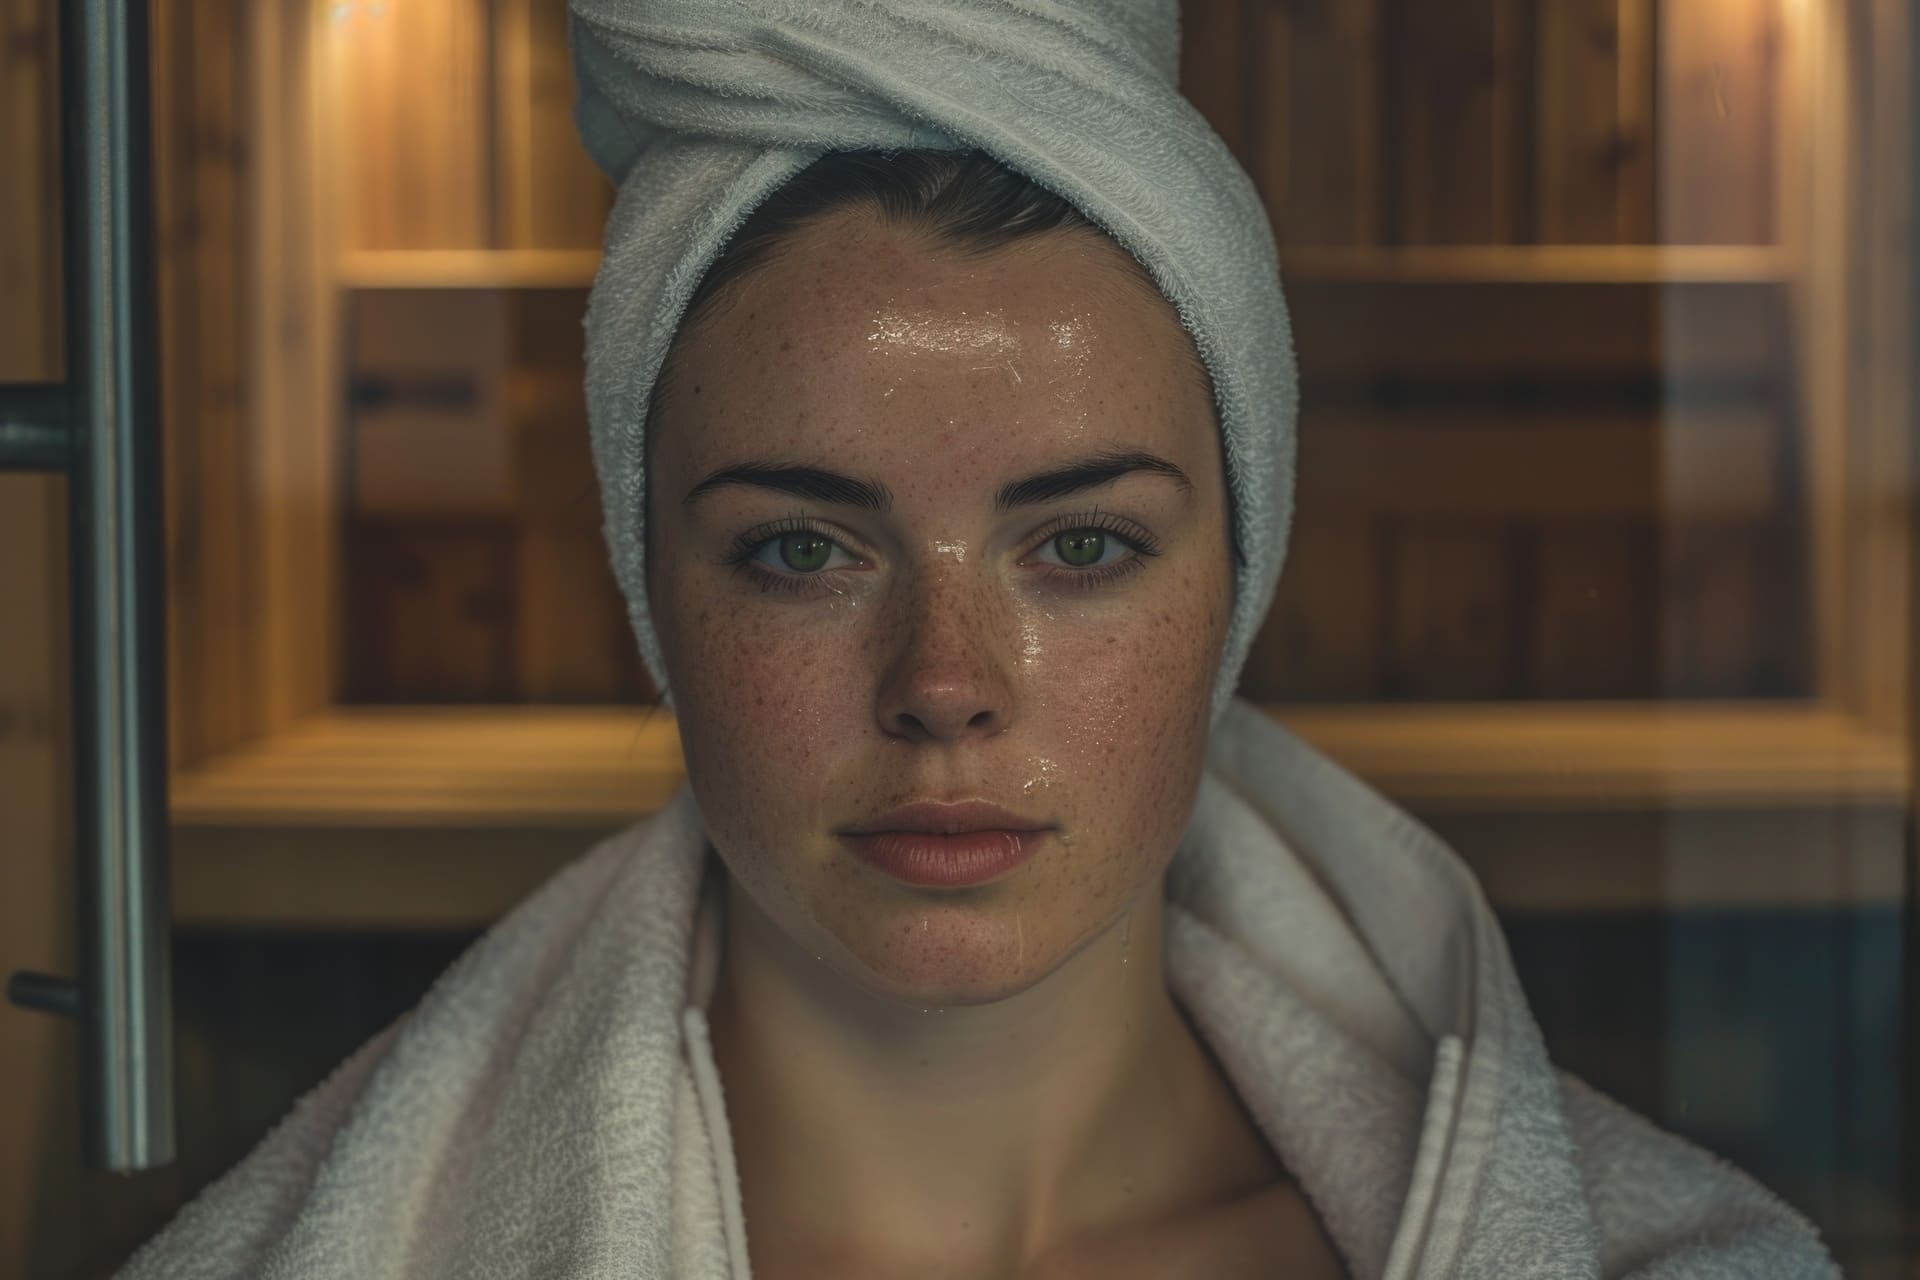 woman wearing towel as makeshift turban possibly postshower after exercising (1) (1)